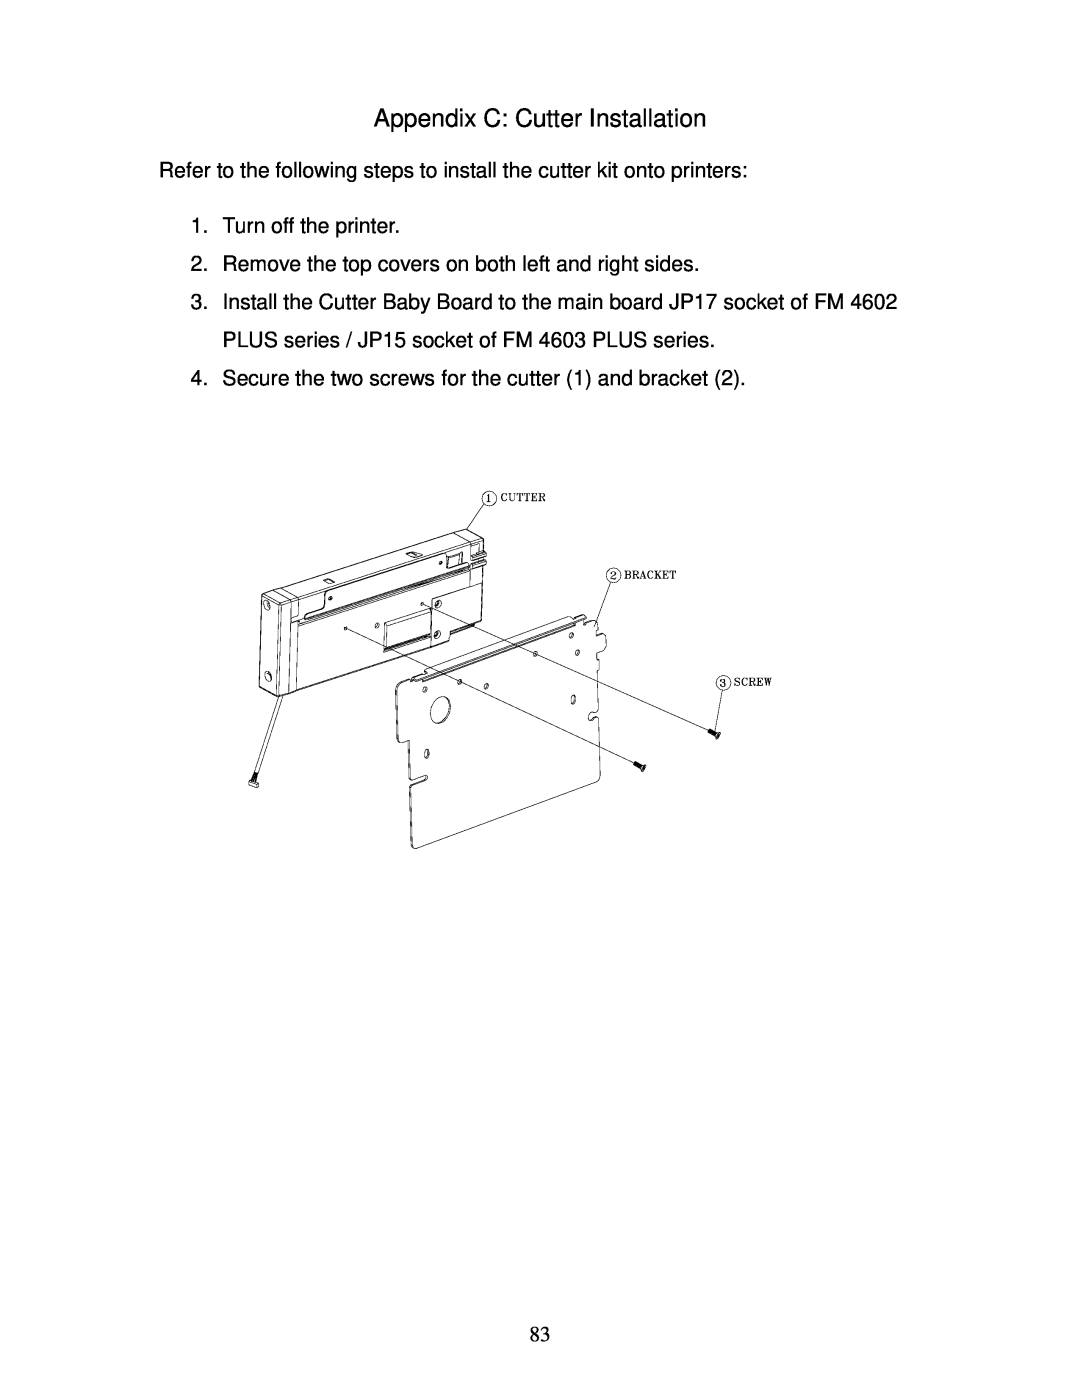 AMT Datasouth 4600 Appendix C Cutter Installation, Refer to the following steps to install the cutter kit onto printers 